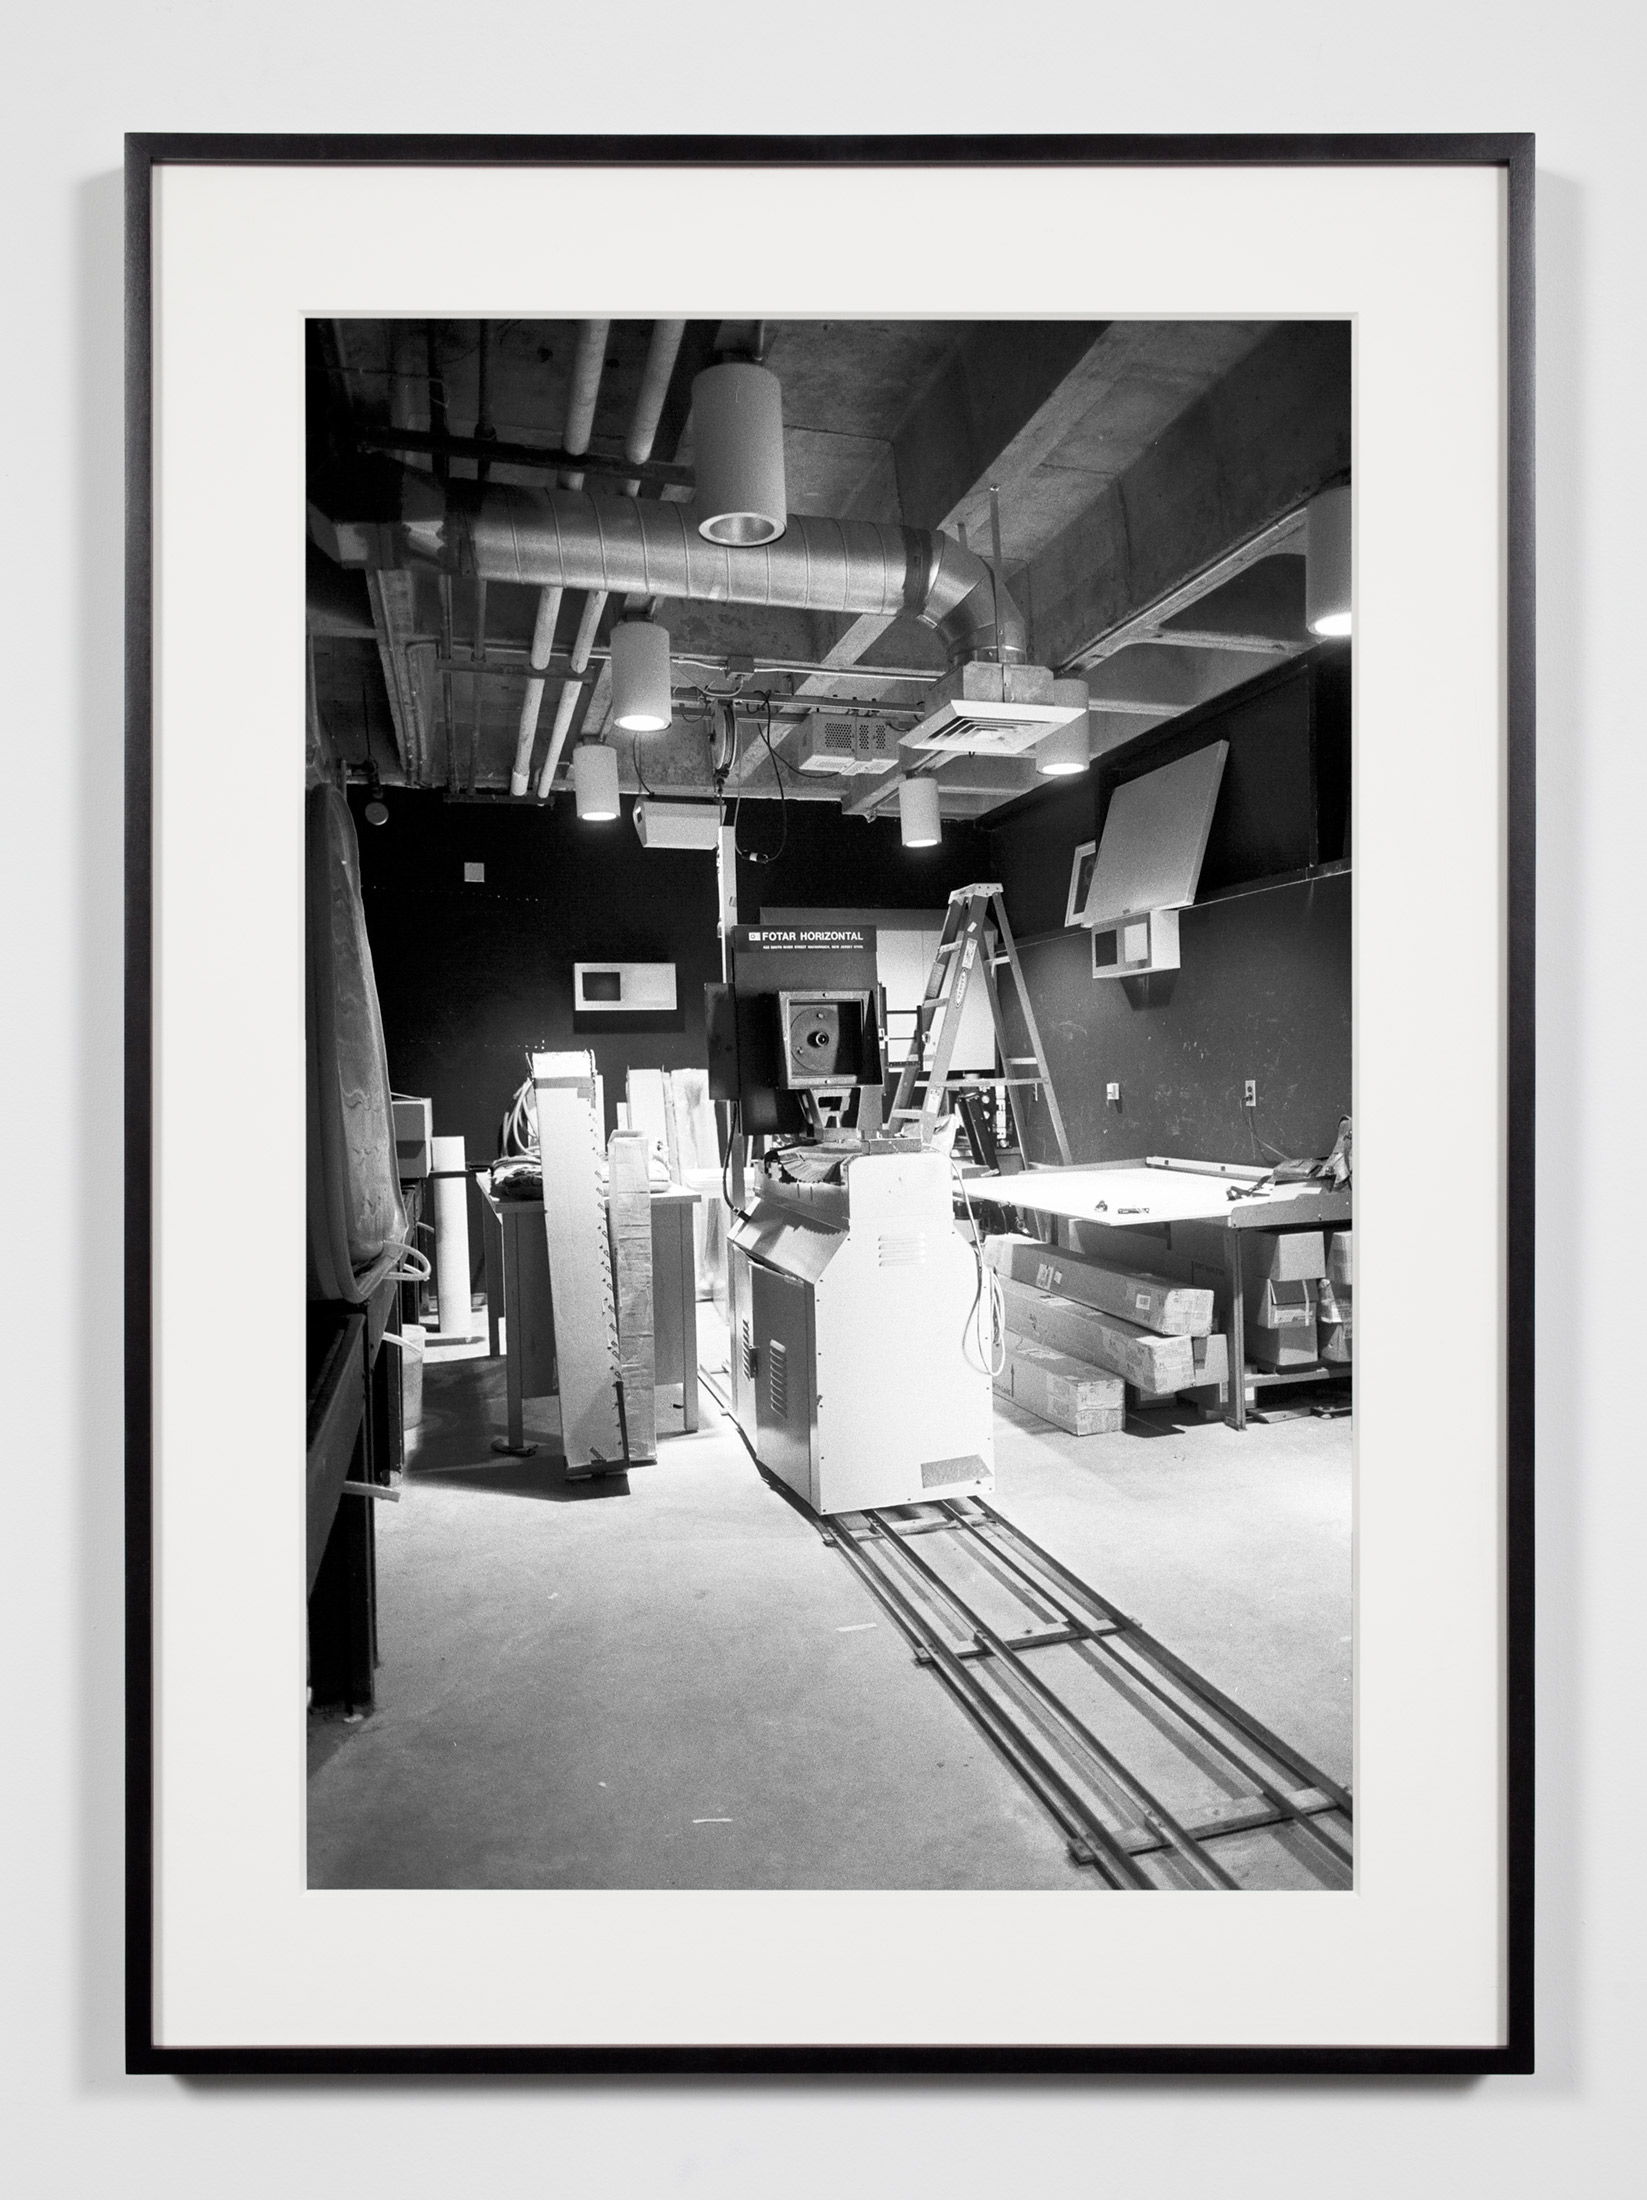   University Darkroom, 8 x 10 Horizontal Enlarger, Irvine, California, July 18, 2008   2011  Epson Ultrachrome K3 archival ink jet print on Hahnemühle Photo Rag paper  36 3/8 x 26 3/8 inches   Industrial Portraits, 2008–    A Diagram of Forces, 2011 